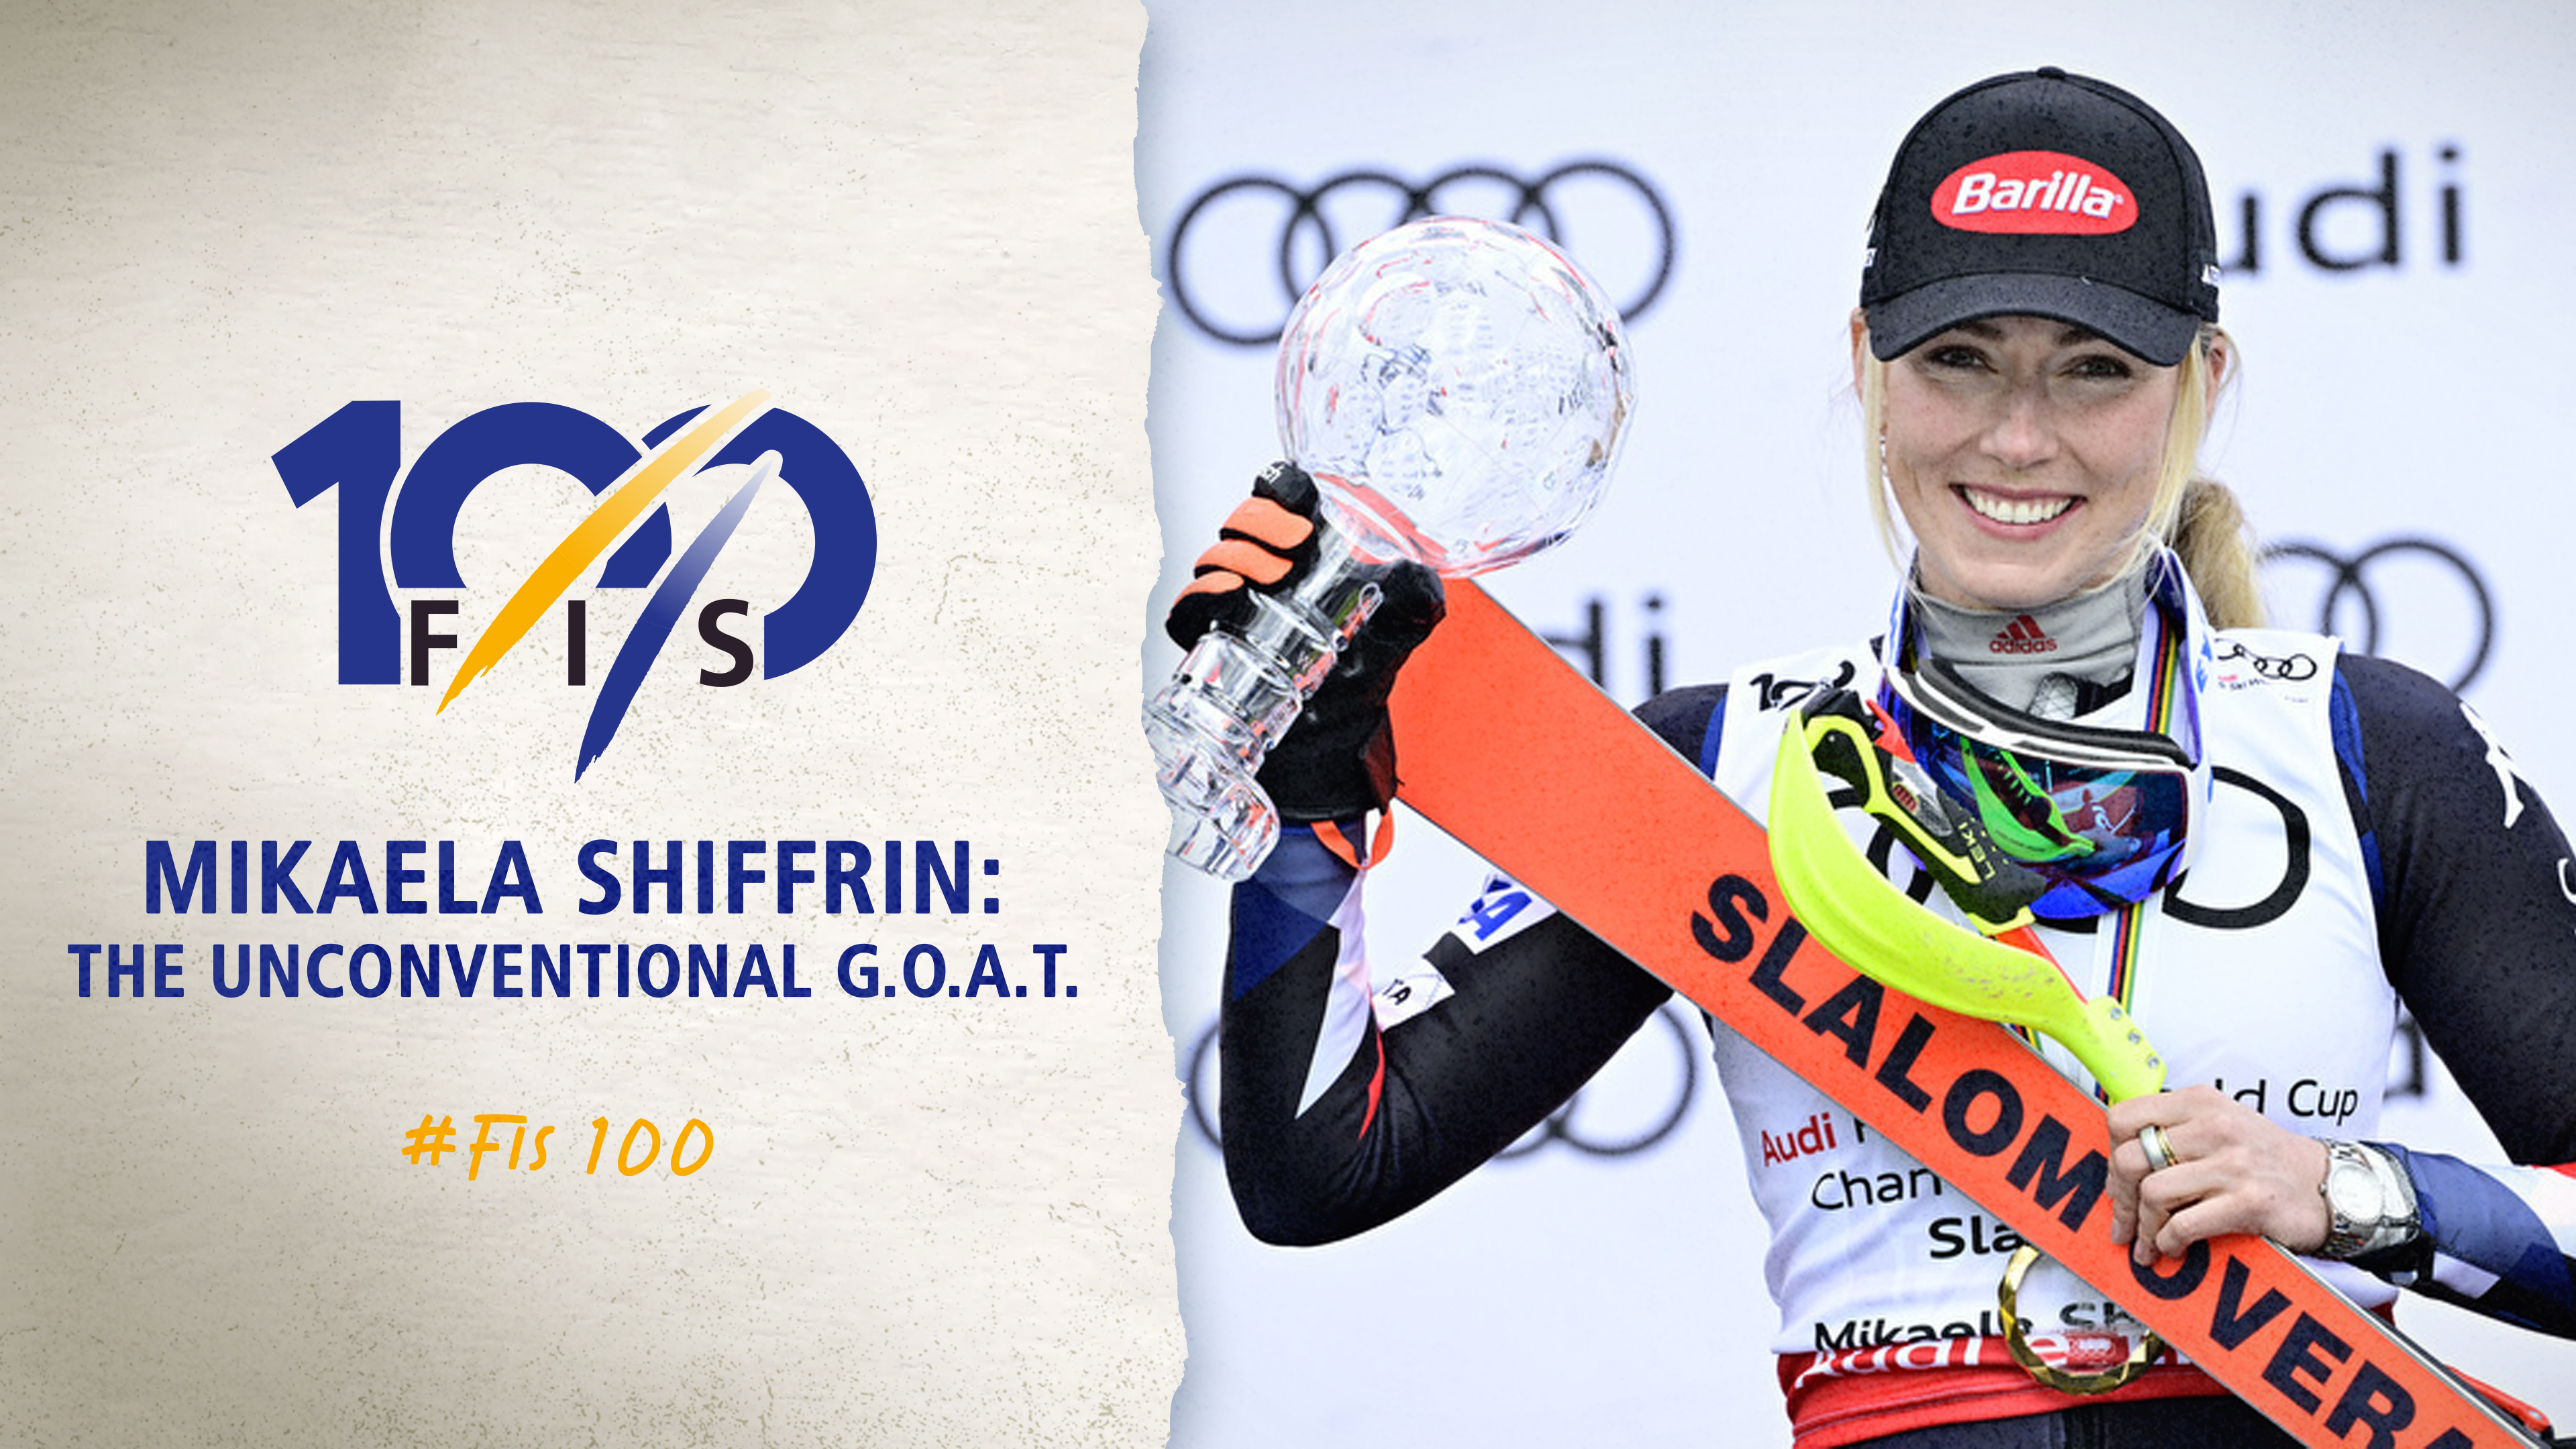 This is #FIS100 - Episode 08 - Mikaela Shiffrin: The Unconventional G.O.A.T.